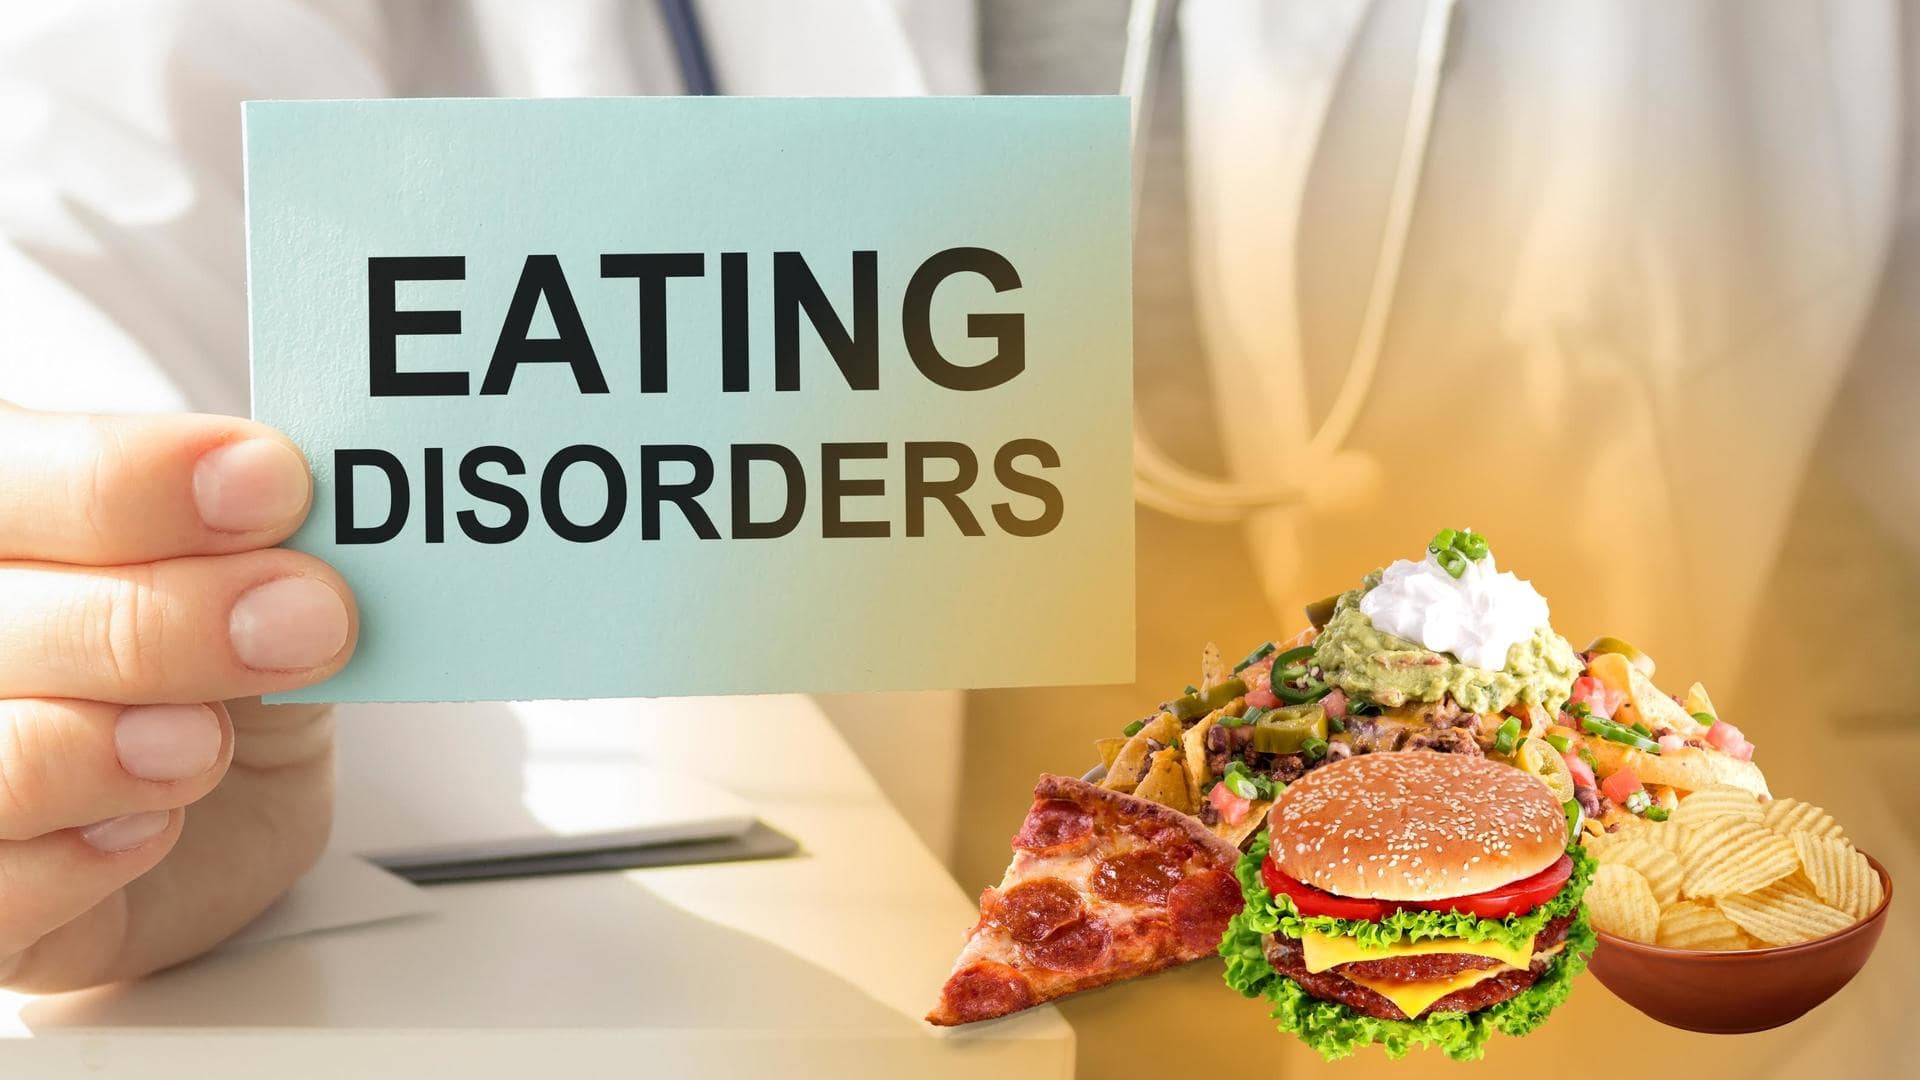 Eating disorder: From its meaning to treatment, know everything here